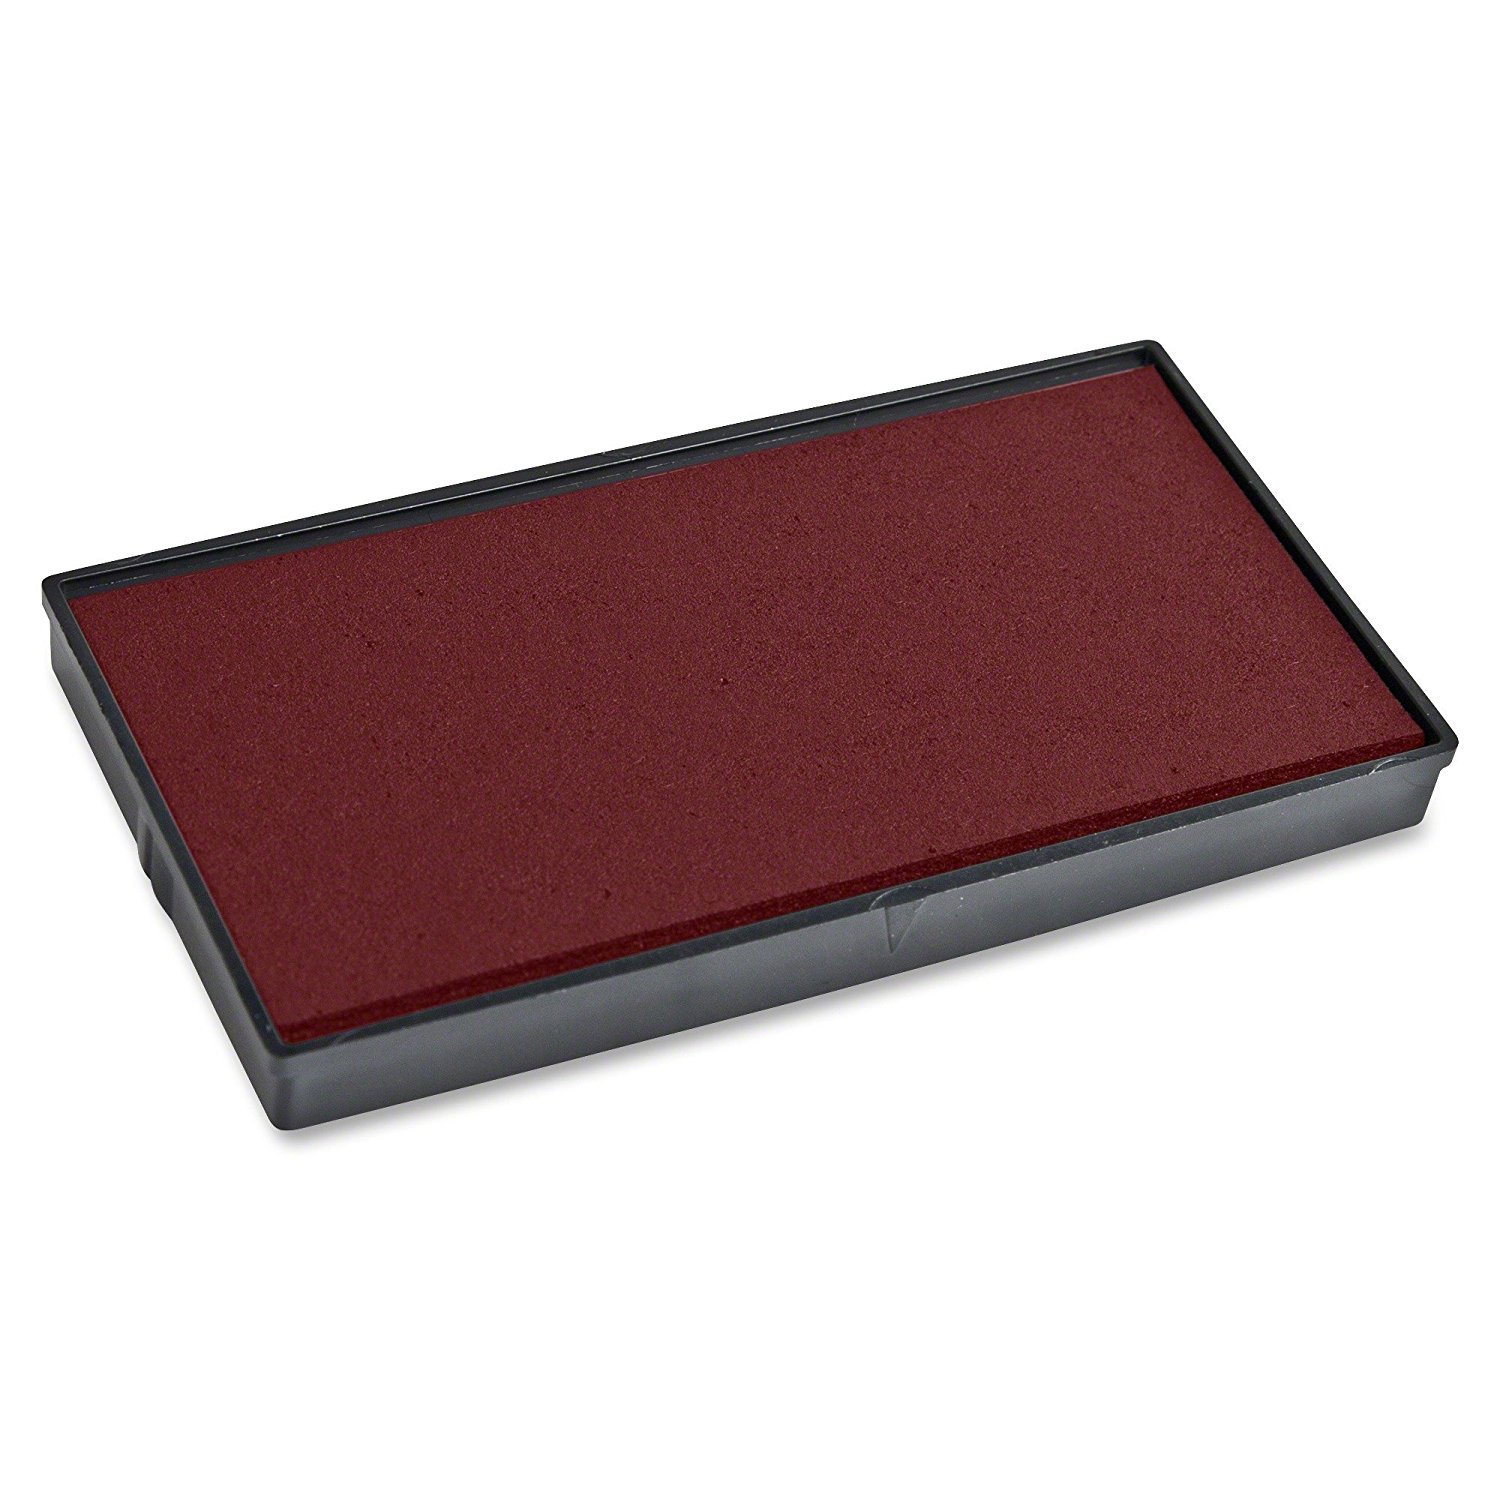 Replacement Pad for 2000 PLUS Printer 60 Self Inking Stamp - Red Ink Color